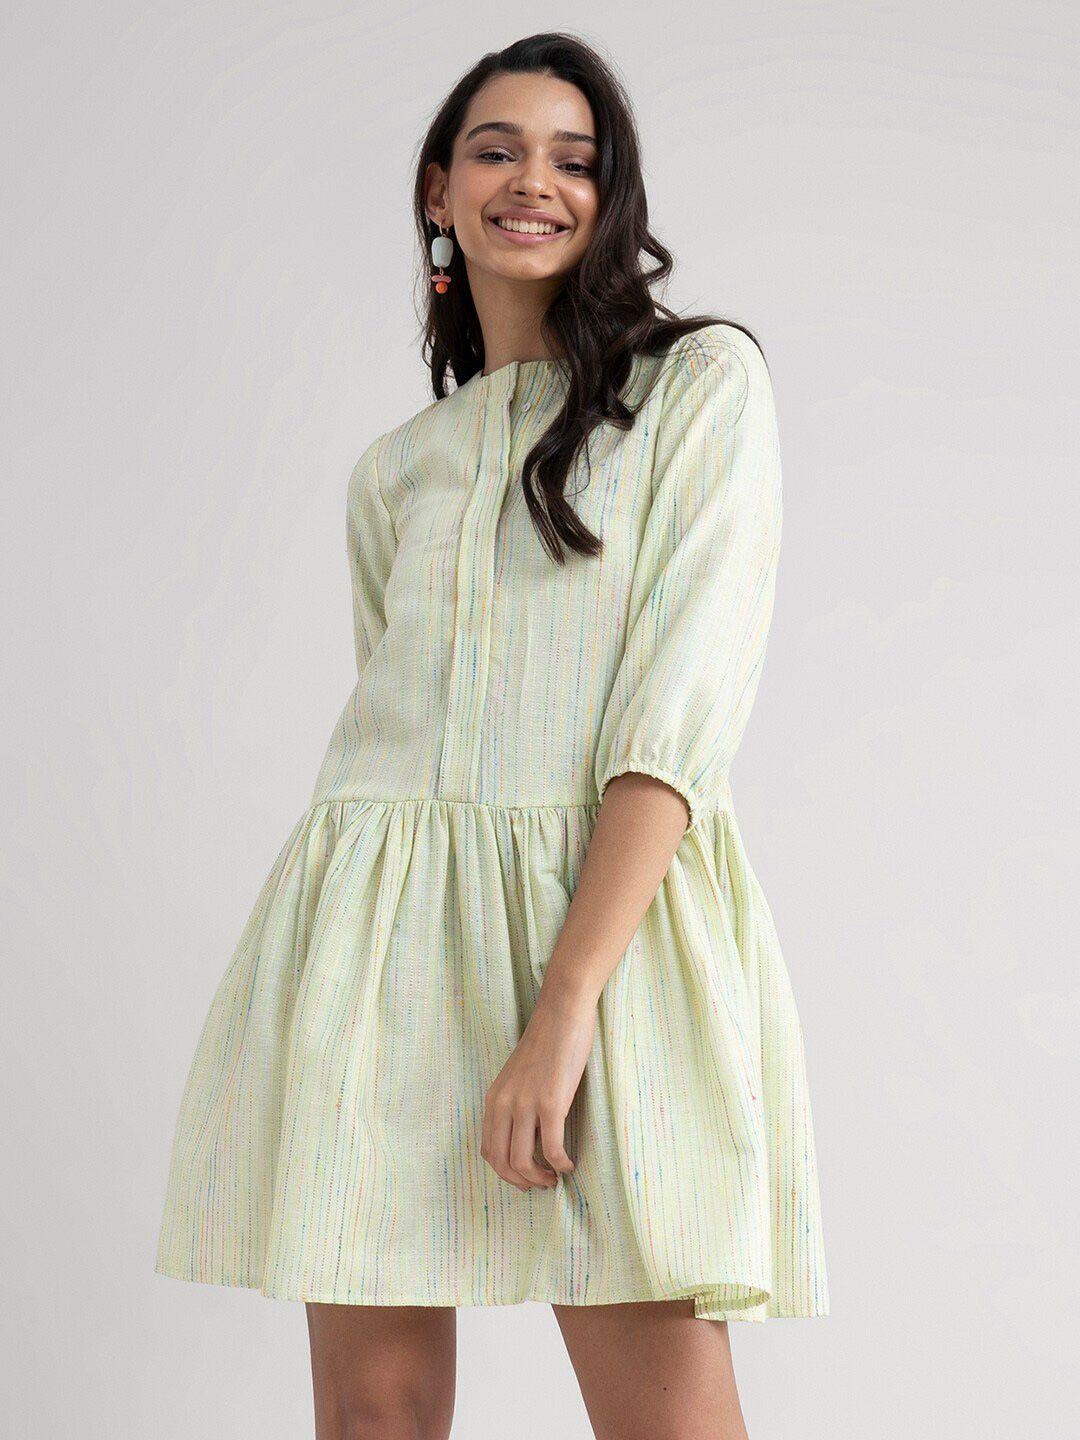 marigold by fablestreet lime green & reed striped dress